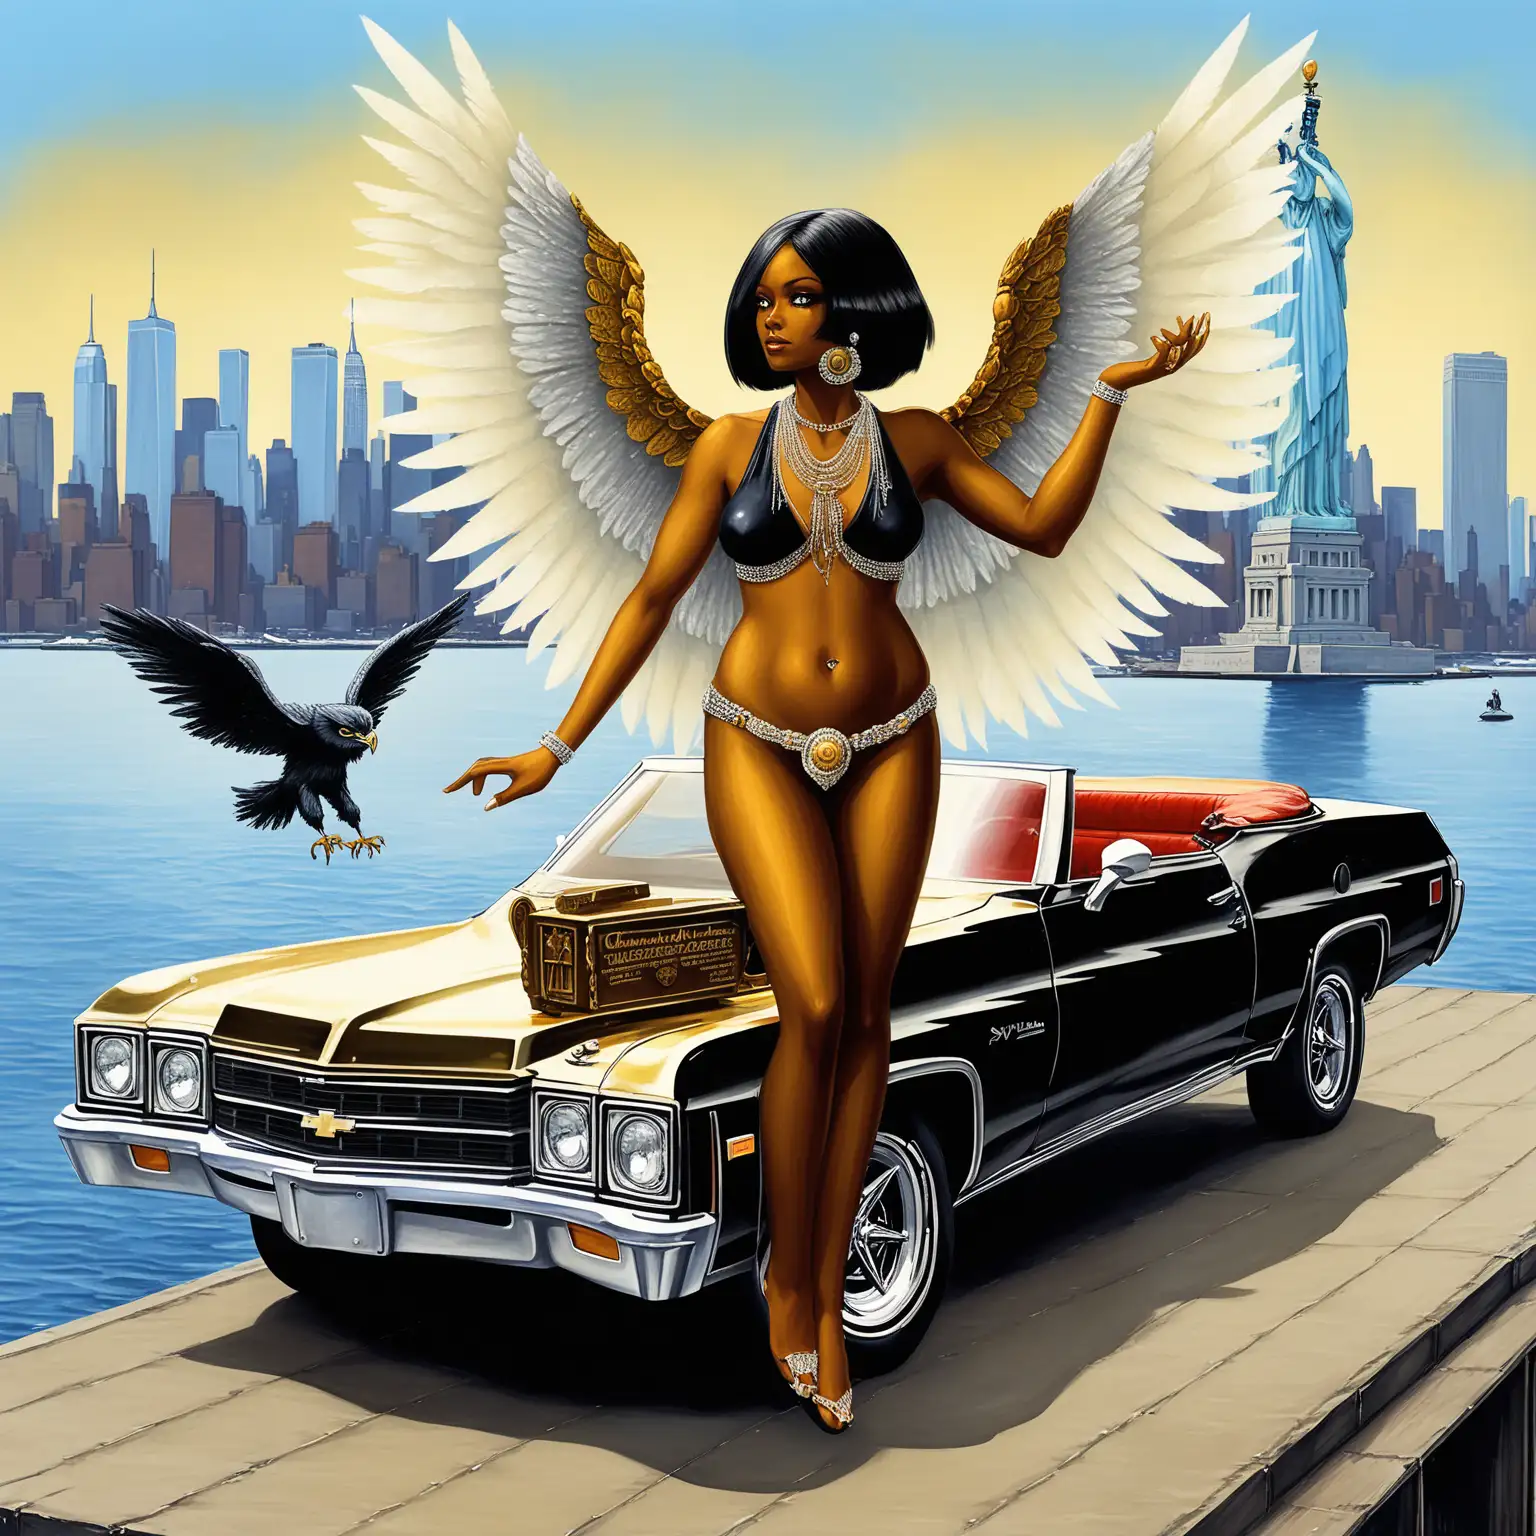 An quiet Gold Dwarf, Slick Bob hairstyle, Harpie Dancer, A woman harpy with long white wings and a black dress standing gracefully.
takes place on an open platform bearing images of stars and depictions of the Great Seal of the United States.

The New York City skyline is visible in the background, beyond the waters of New York Harbor.
1970 Chevrolet Chevelle SS Convertible in the background 
,The woman's body parts such as chest, thigh, stomach, and abdomen are visible
Boracite Jewelry,  Necklace, Rings and earrings. Black woman painterly smooth, extremely sharp detail, finely tuned, 8 k, ultra sharp focus, illustration, illustration, art by Ayami Kojima Beautiful Thick Sexy Black women 
Slick Bob hairstyle 